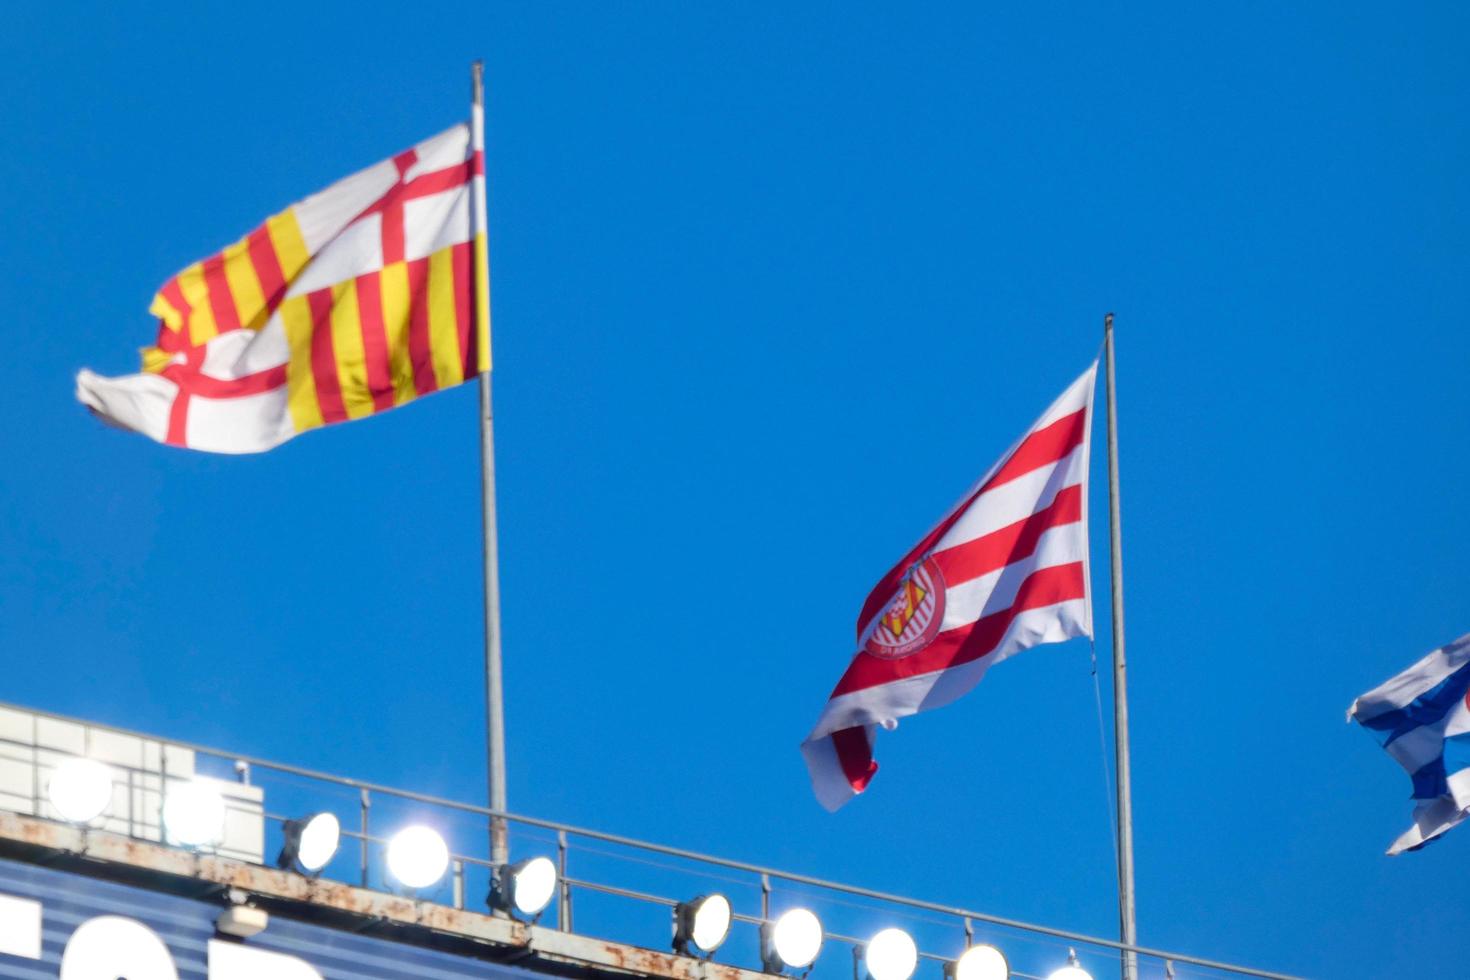 Flags of different countries and sports teams, flags with different coloured stripes. photo